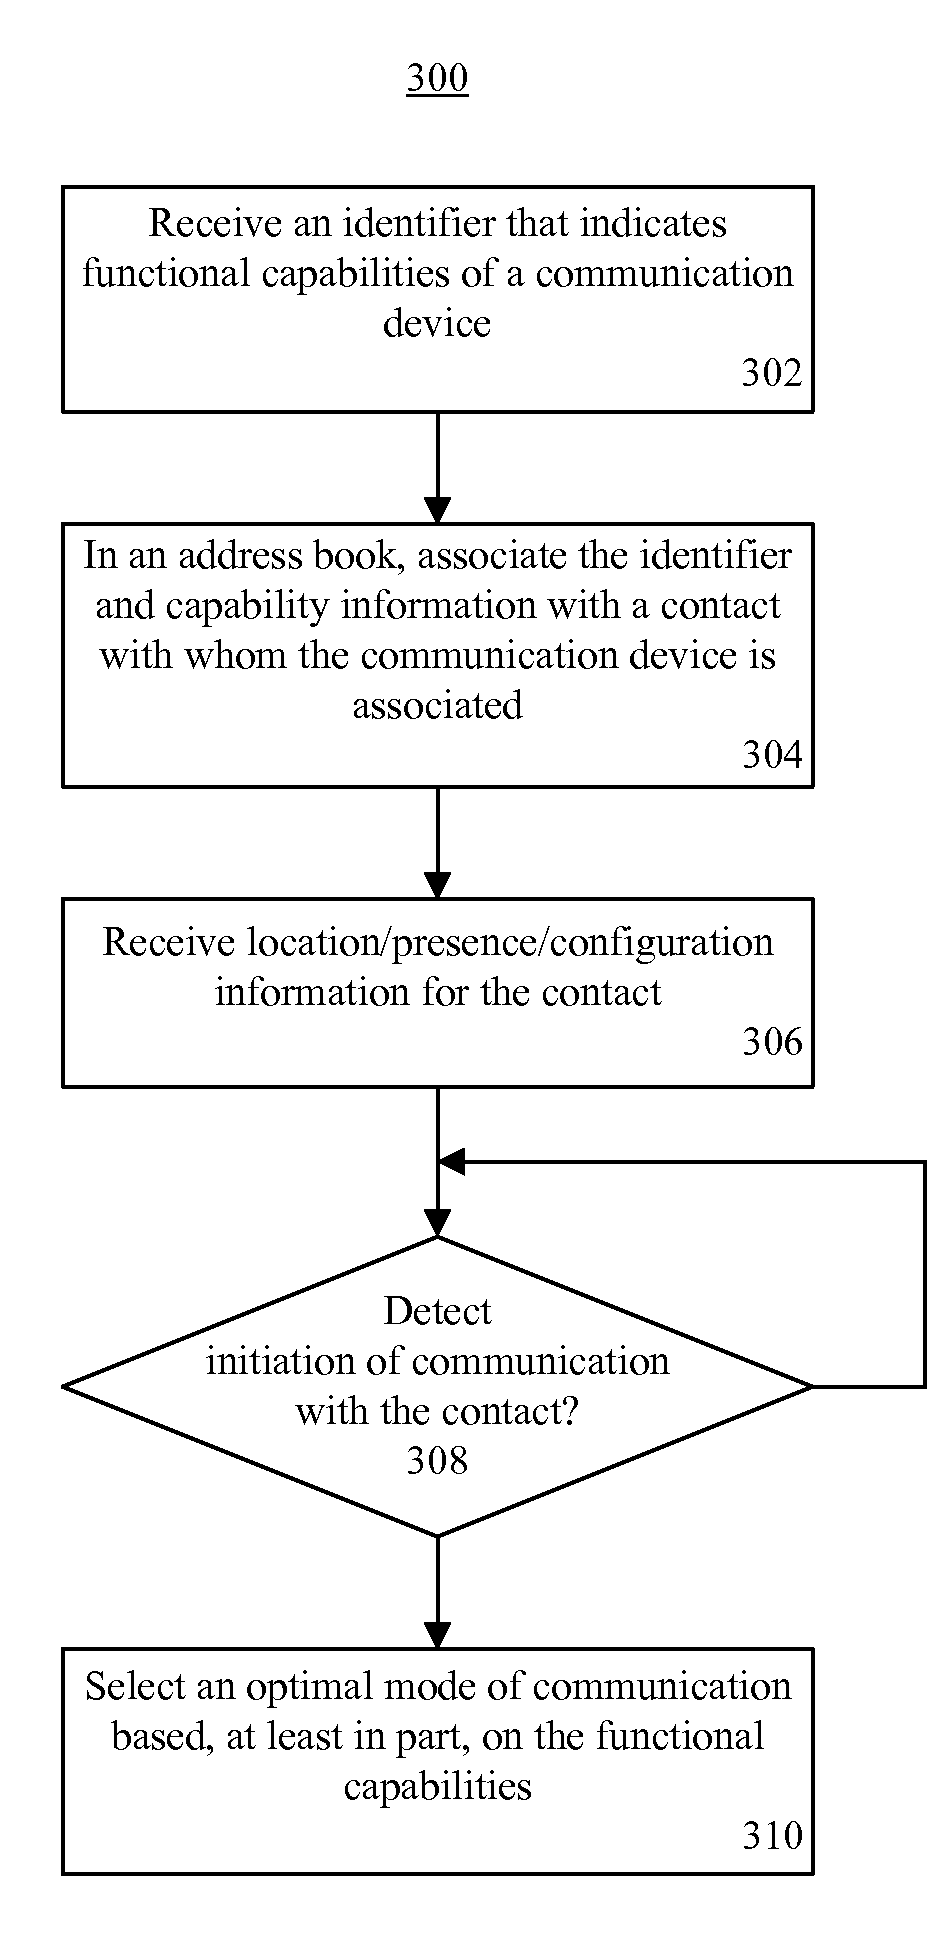 Storing device capability information in an address book